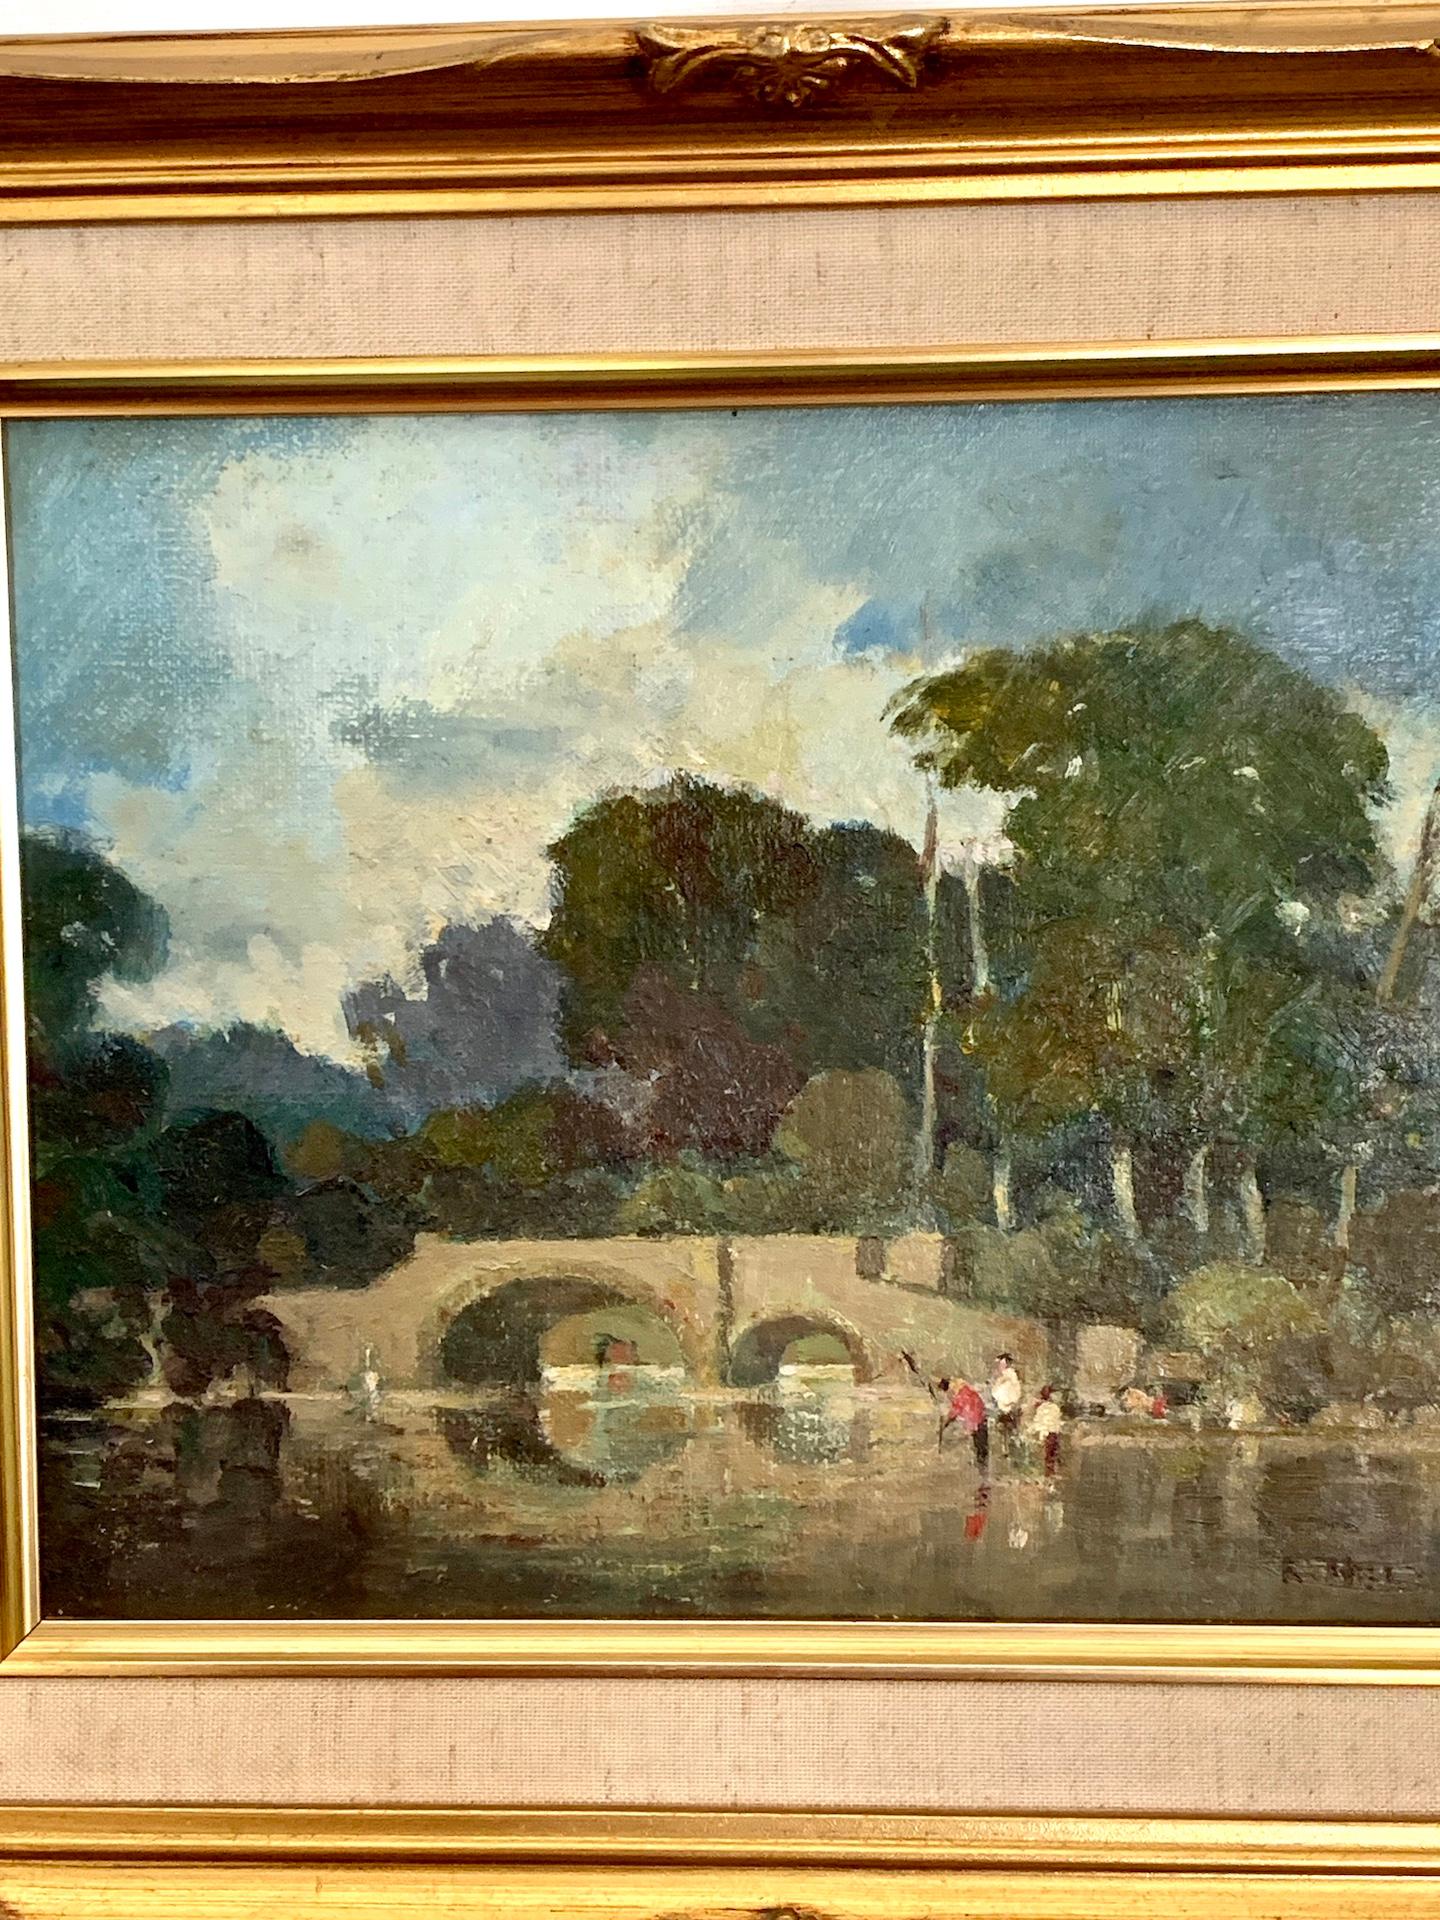 20th Century Modern British Landscape with fisherman, bridge, trees,  - Painting by Robert W Hill